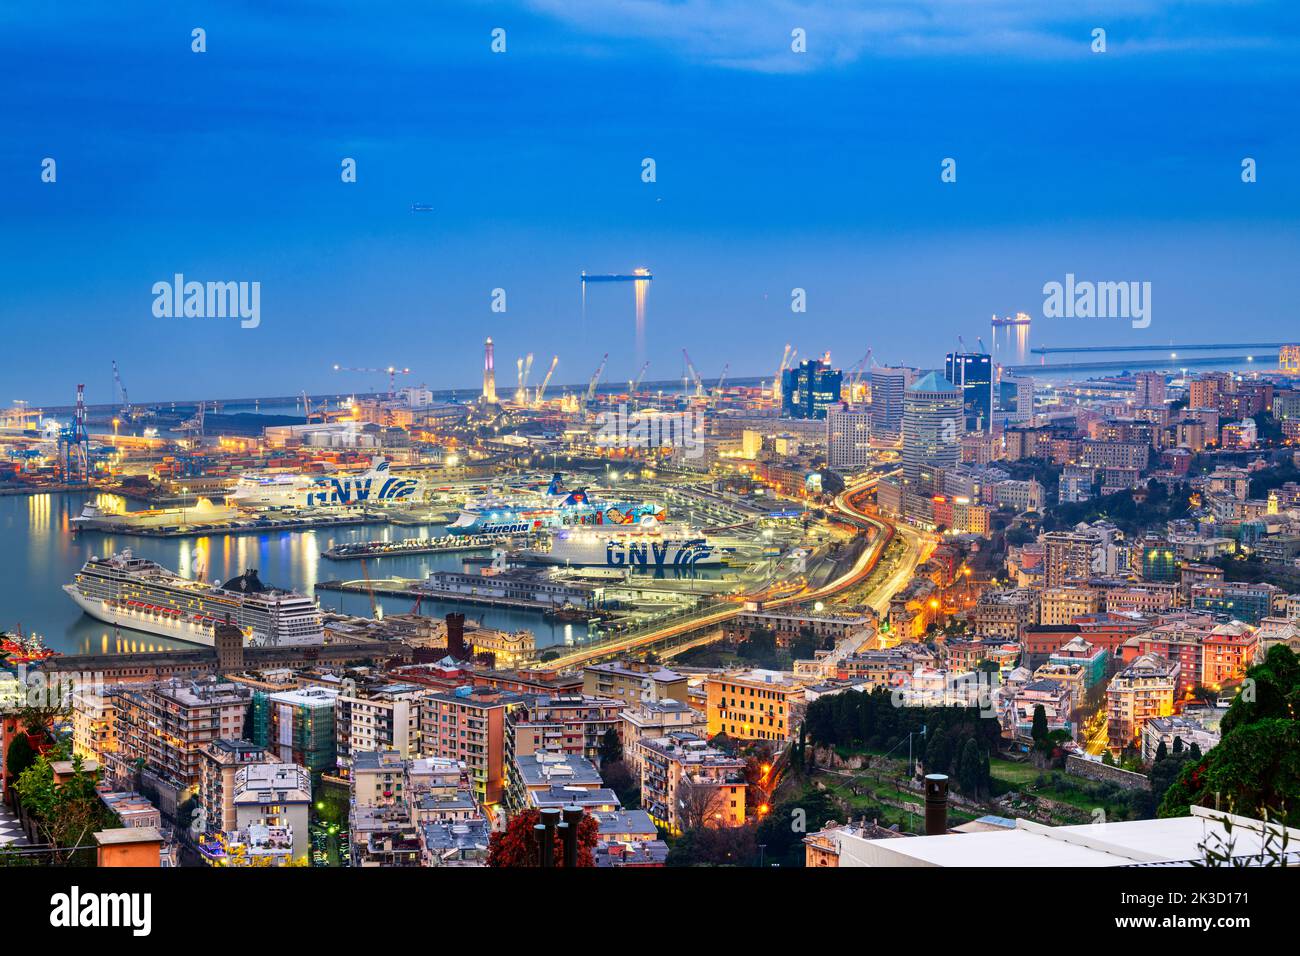 GENOA, ITALY - DECEMBER 31, 2021: Ferries and cargo ships wait in the Port of Genoa at dusk. With a trade volume of 51.6 million tonnes, it is one of Stock Photo